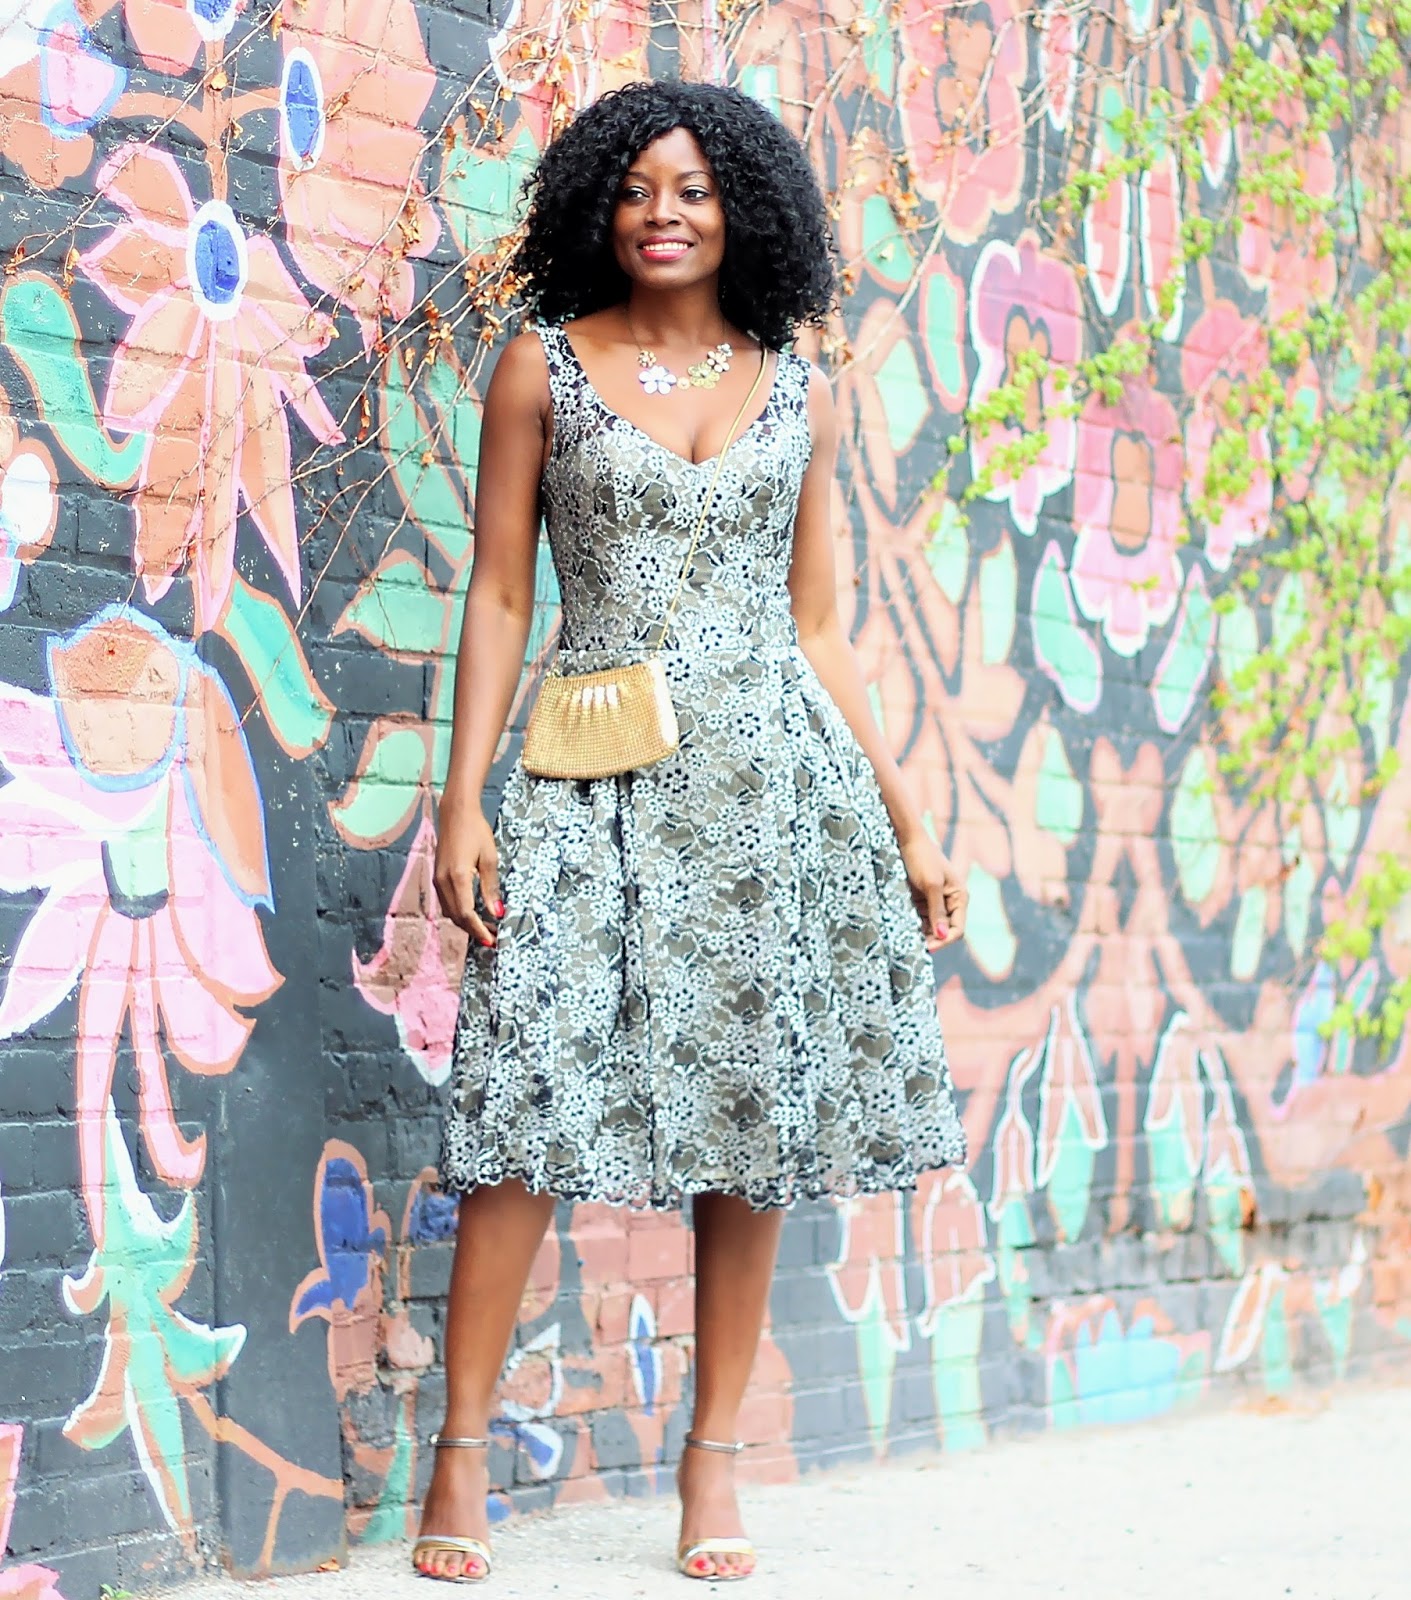 SUMMER WEDDING GUEST OUTFIT: BLACK AND LACE CLAUDETTE SWING DRESS